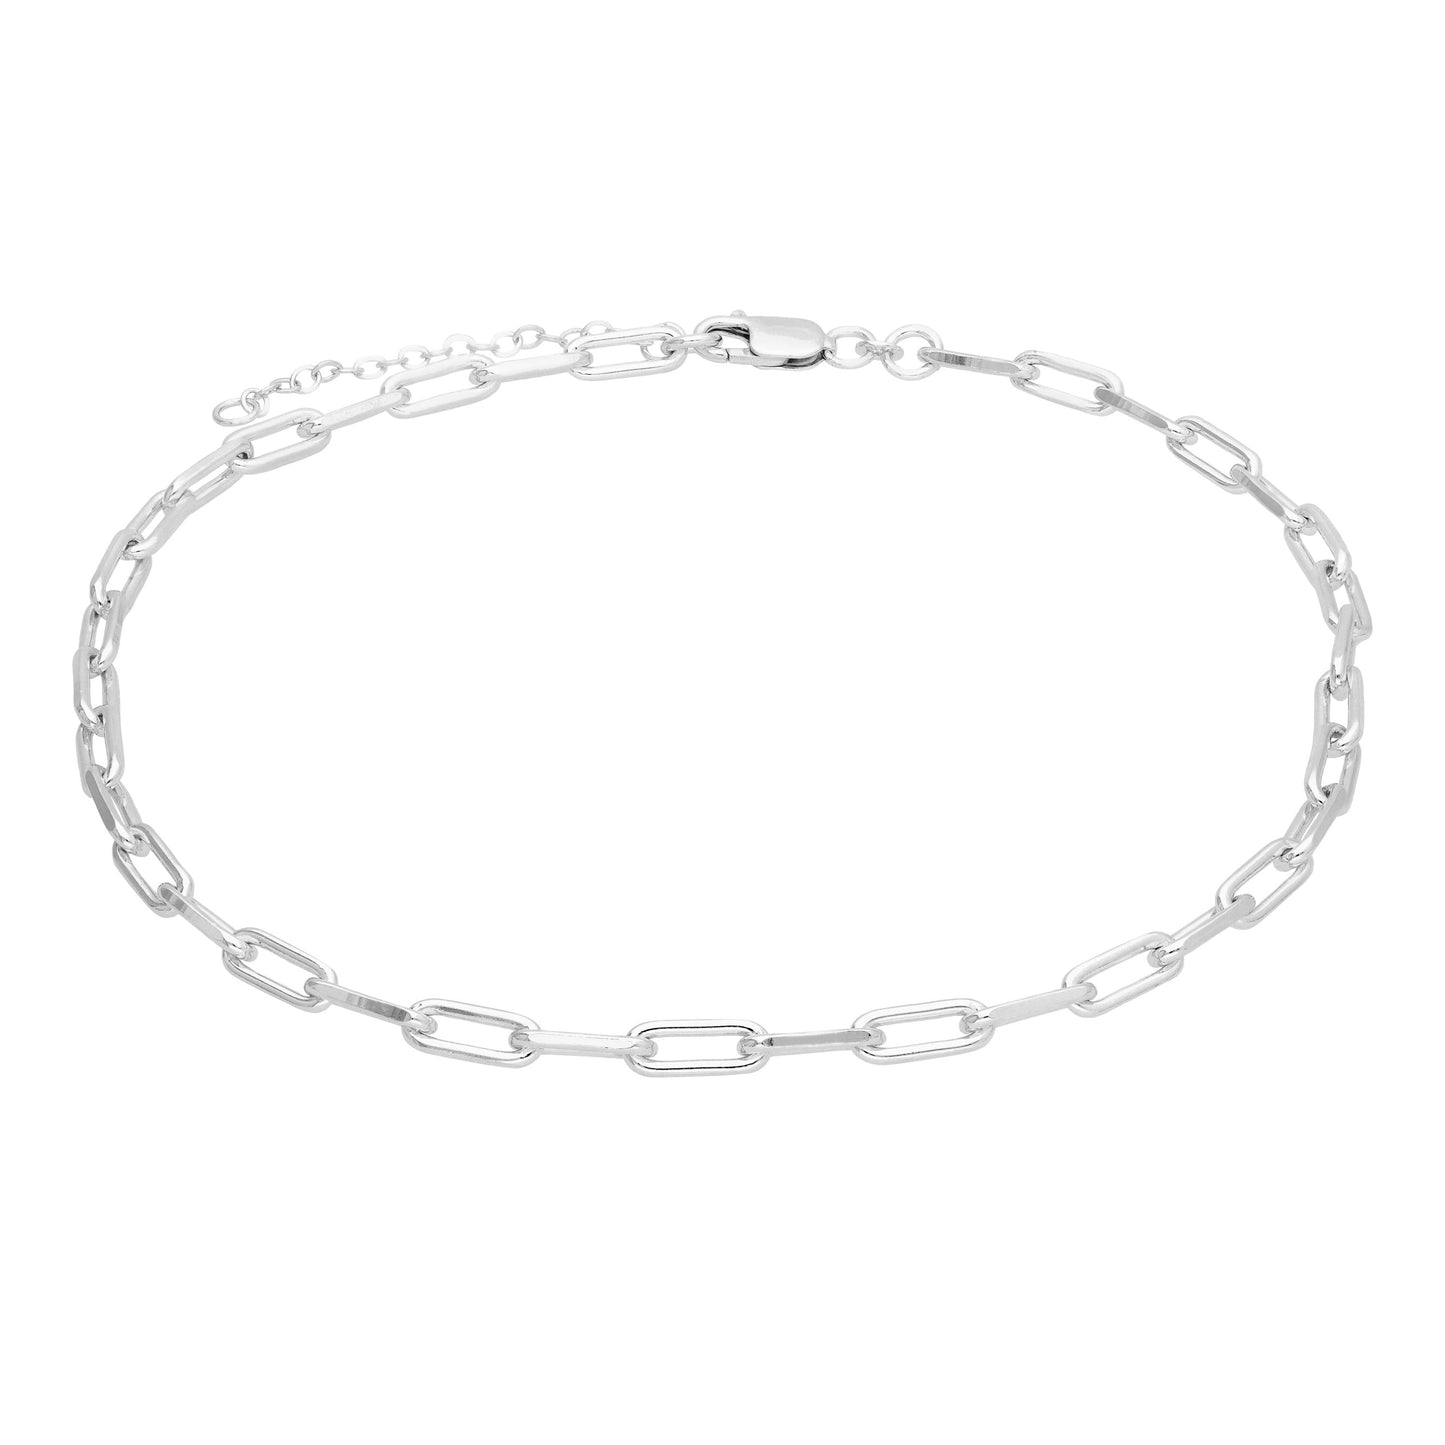 Sterling Silver Long Link Chain Choker Necklace 14-16 Inches